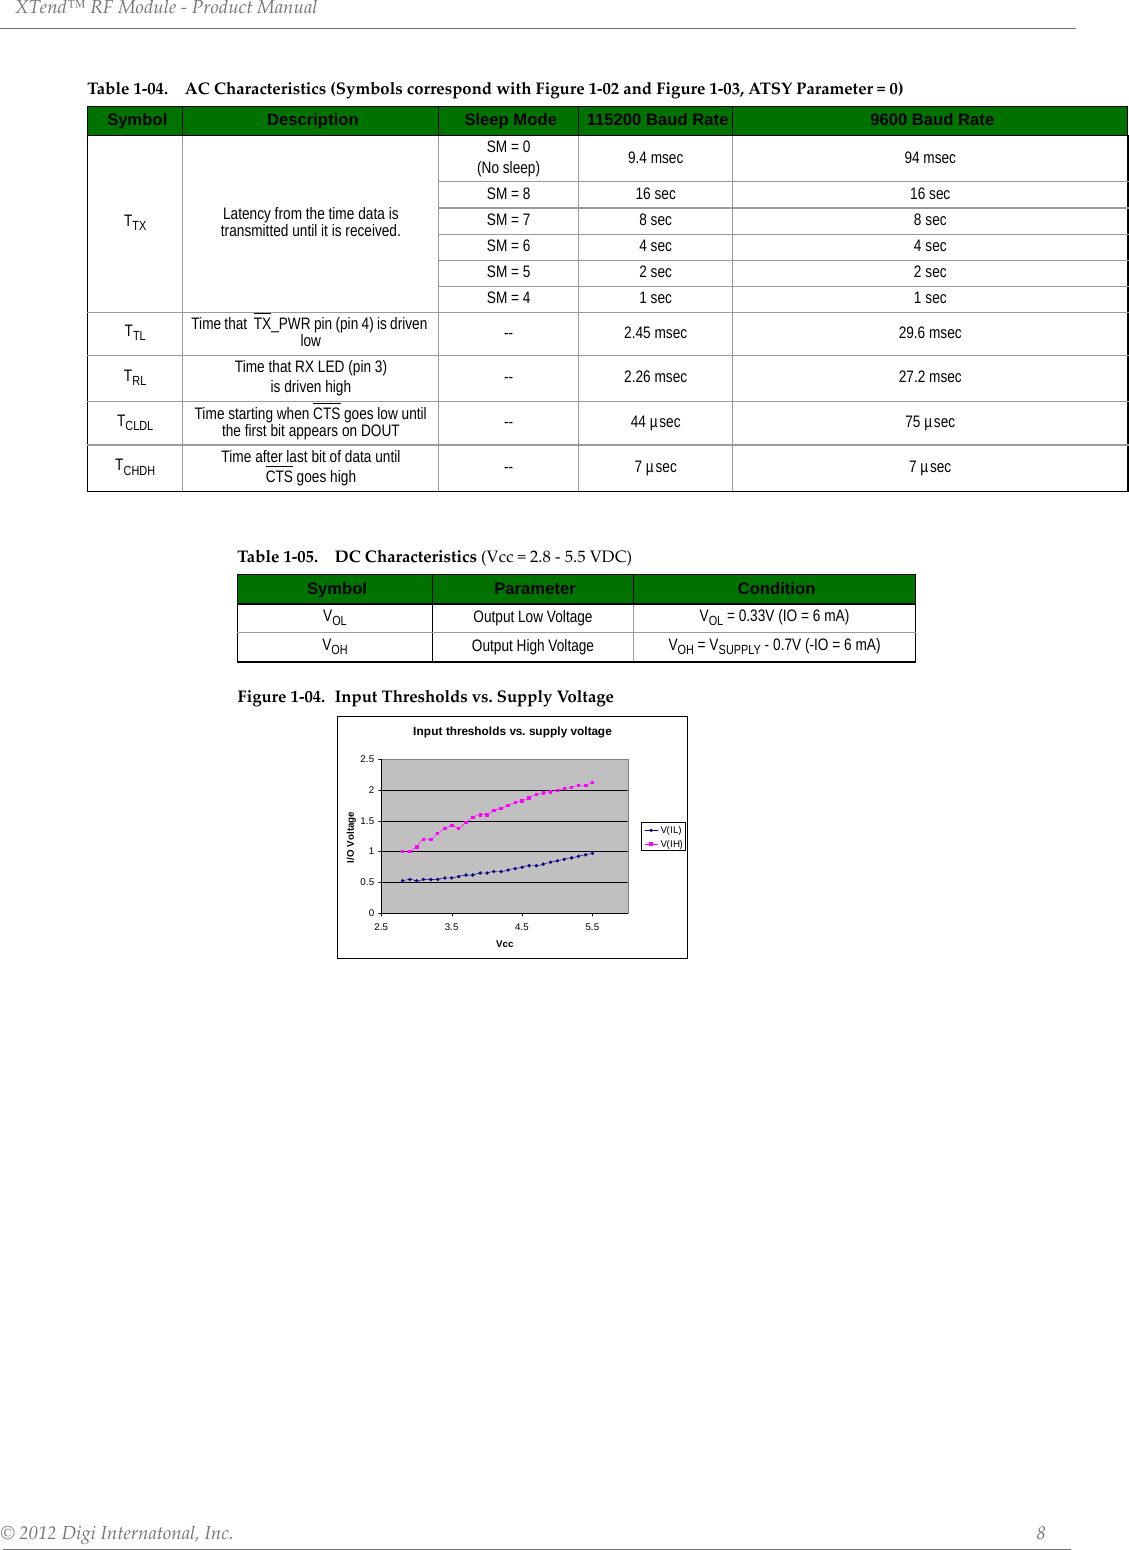 XTend™ RF Module - Product Manual © 2012 Digi Internatonal, Inc.      8Figure 1-04. Input Thresholds vs. Supply VoltageTable 1-04. AC Characteristics (Symbols correspond with Figure 1-02 and Figure 1-03, ATSY Parameter = 0)Symbol Description Sleep Mode 115200 Baud Rate 9600 Baud RateTTX Latency from the time data is transmitted until it is received.SM = 0(No sleep) 9.4 msec 94 msecSM = 8 16 sec 16 secSM = 7 8 sec 8 secSM = 6 4 sec 4 secSM = 5 2 sec 2 secSM = 4 1 sec 1 secTTL Time that  TX_PWR pin (pin 4) is driven low -- 2.45 msec 29.6 msecTRL Time that RX LED (pin 3)is driven high -- 2.26 msec 27.2 msecTCLDL Time starting when CTS goes low until the first bit appears on DOUT -- 44 µsec 75 µsecTCHDH Time after last bit of data until CTS goes high -- 7 µsec 7 µsecTable 1-05. DC Characteristics (Vcc = 2.8 - 5.5 VDC)Symbol Parameter ConditionVOL Output Low Voltage VOL = 0.33V (IO = 6 mA)VOH Output High Voltage VOH = VSUPPLY - 0.7V (-IO = 6 mA)Input thresholds vs. supply voltage00.511.522.52.5 3.5 4.5 5.5VccI/O VoltageV(IL)V(IH)